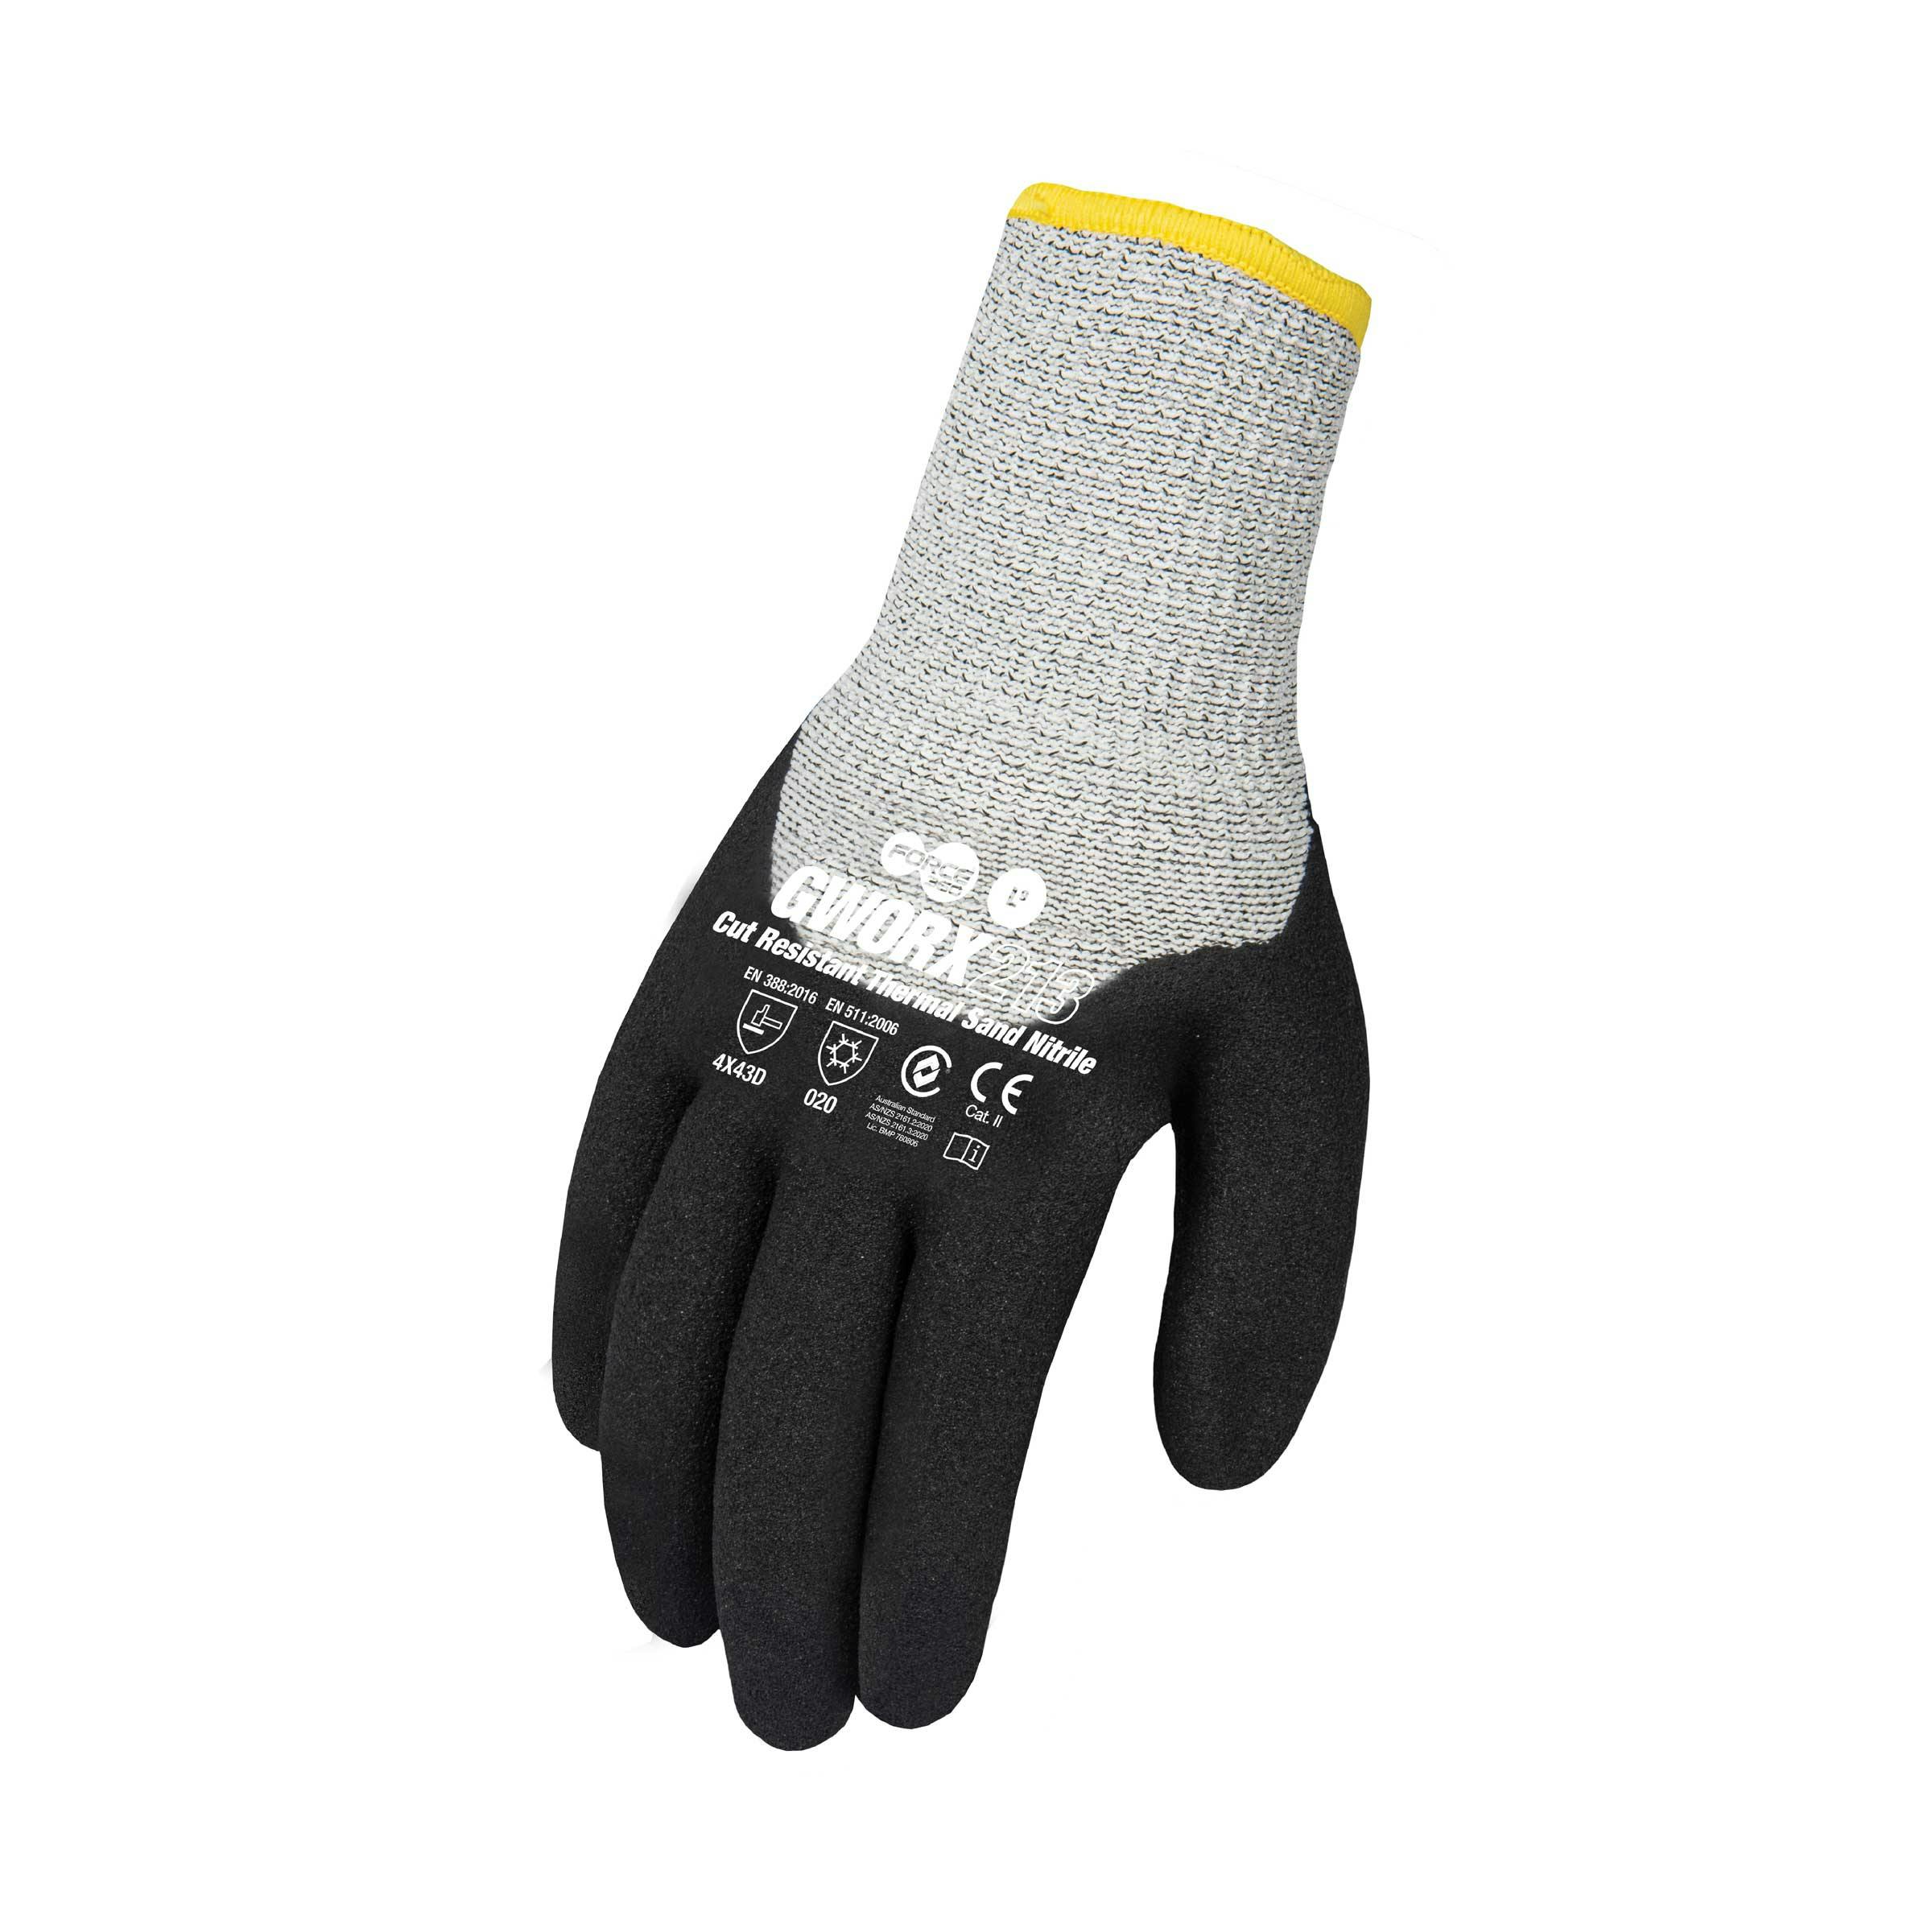 Force360 Worx Thermal Cut Level D Nitrile Glove_1